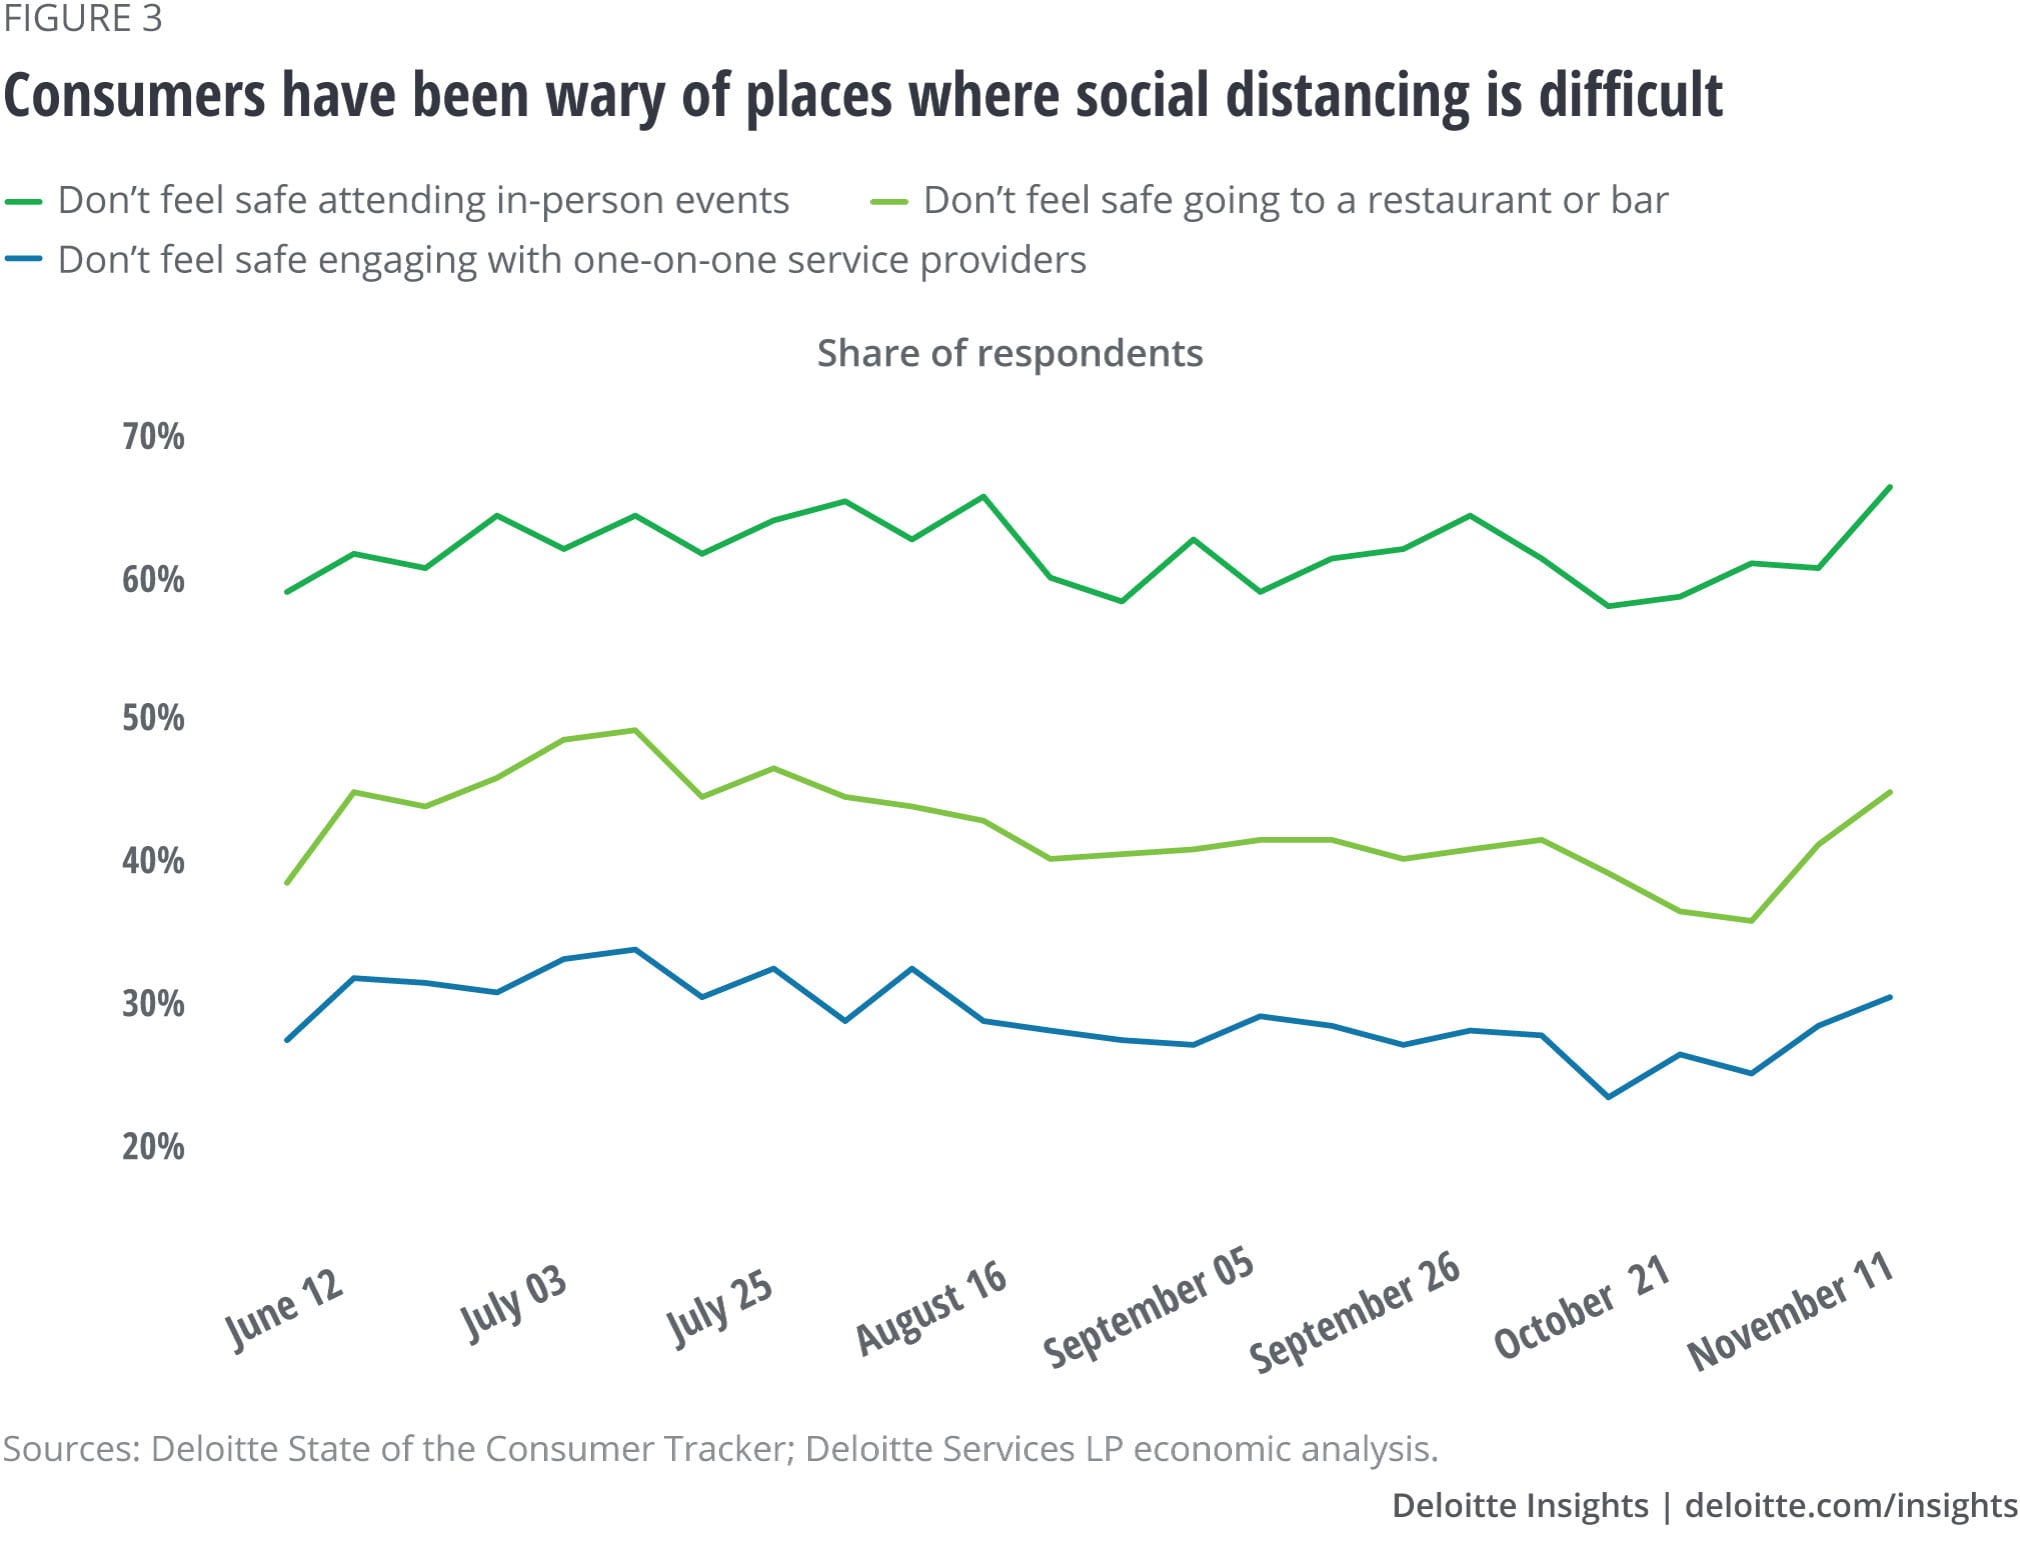 Consumers have been wary of places where social distancing is difficult